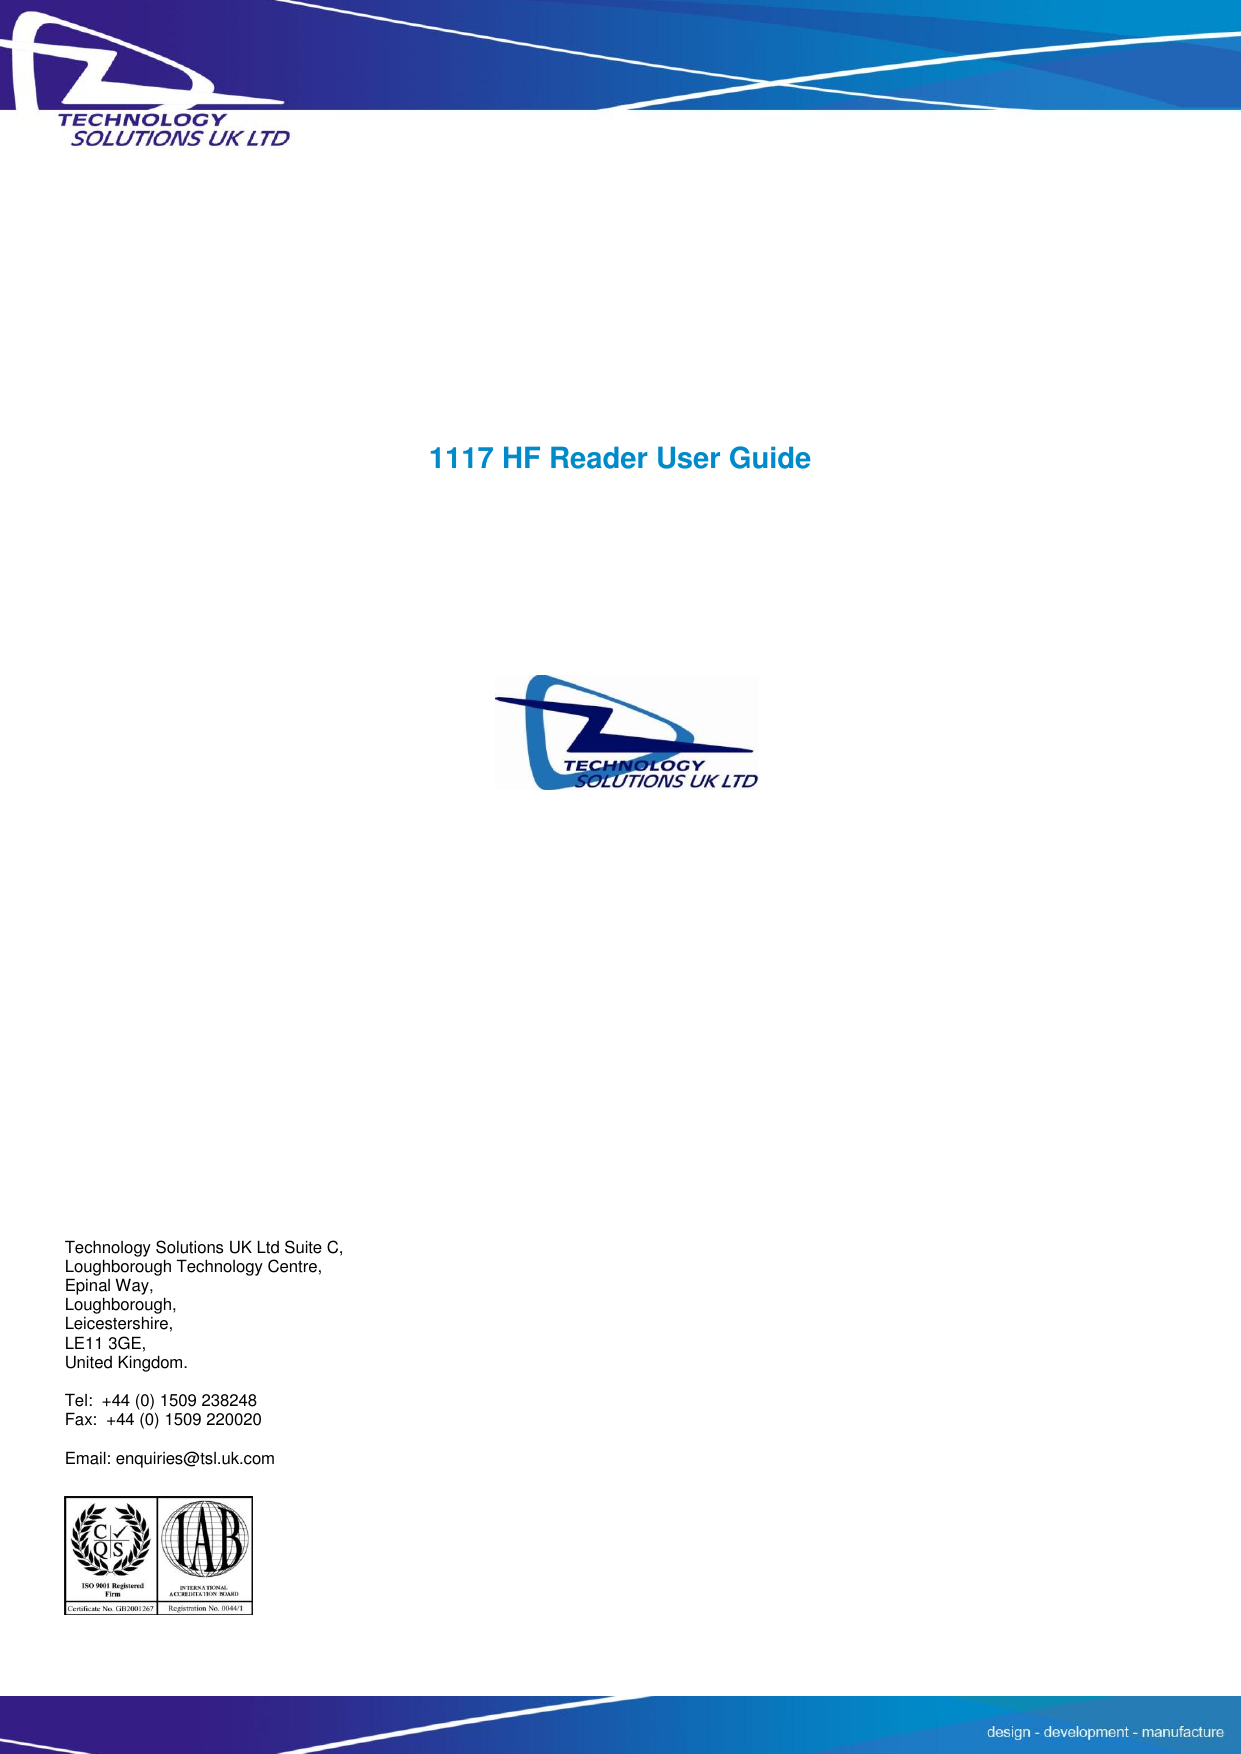              1117 HF Reader User GuideTechnology Solutions UK Ltd Suite C, Loughborough Technology Centre, Epinal Way, Loughborough, Leicestershire, LE11 3GE, United Kingdom.  Tel:  +44 (0) 1509 238248 Fax:  +44 (0) 1509 220020  Email: enquiries@tsl.uk.com 